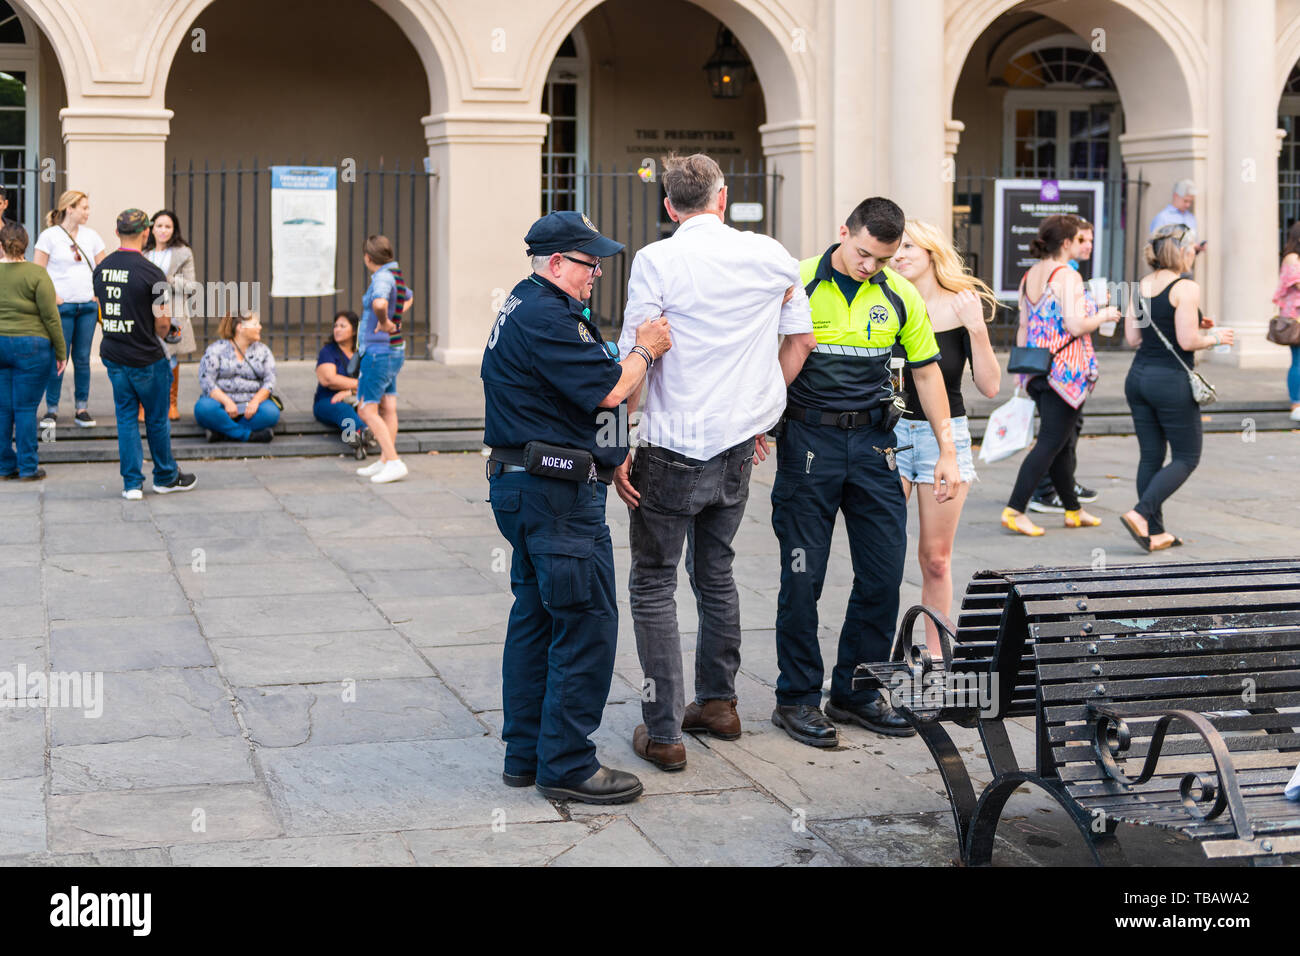 New Orleans, USA - April 22, 2018: Jackson Square in Louisiana city town during day with EMS security police guard officer arresting man Stock Photo